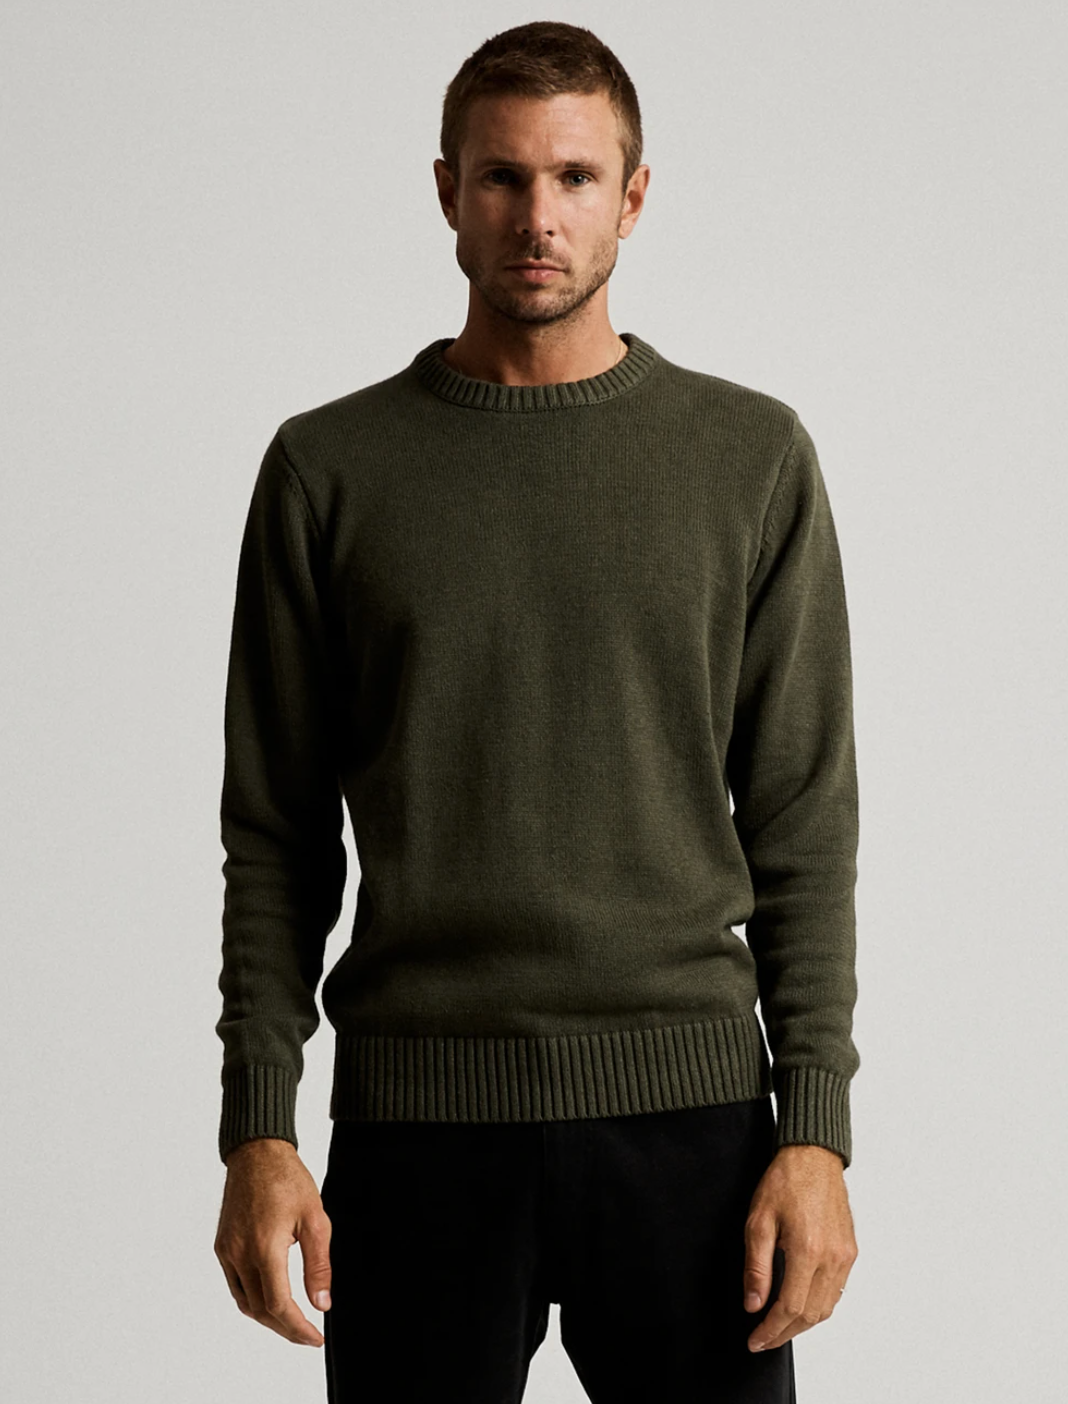 Mr Simple - Standard Knit / Army | Buster McGee Daylesford